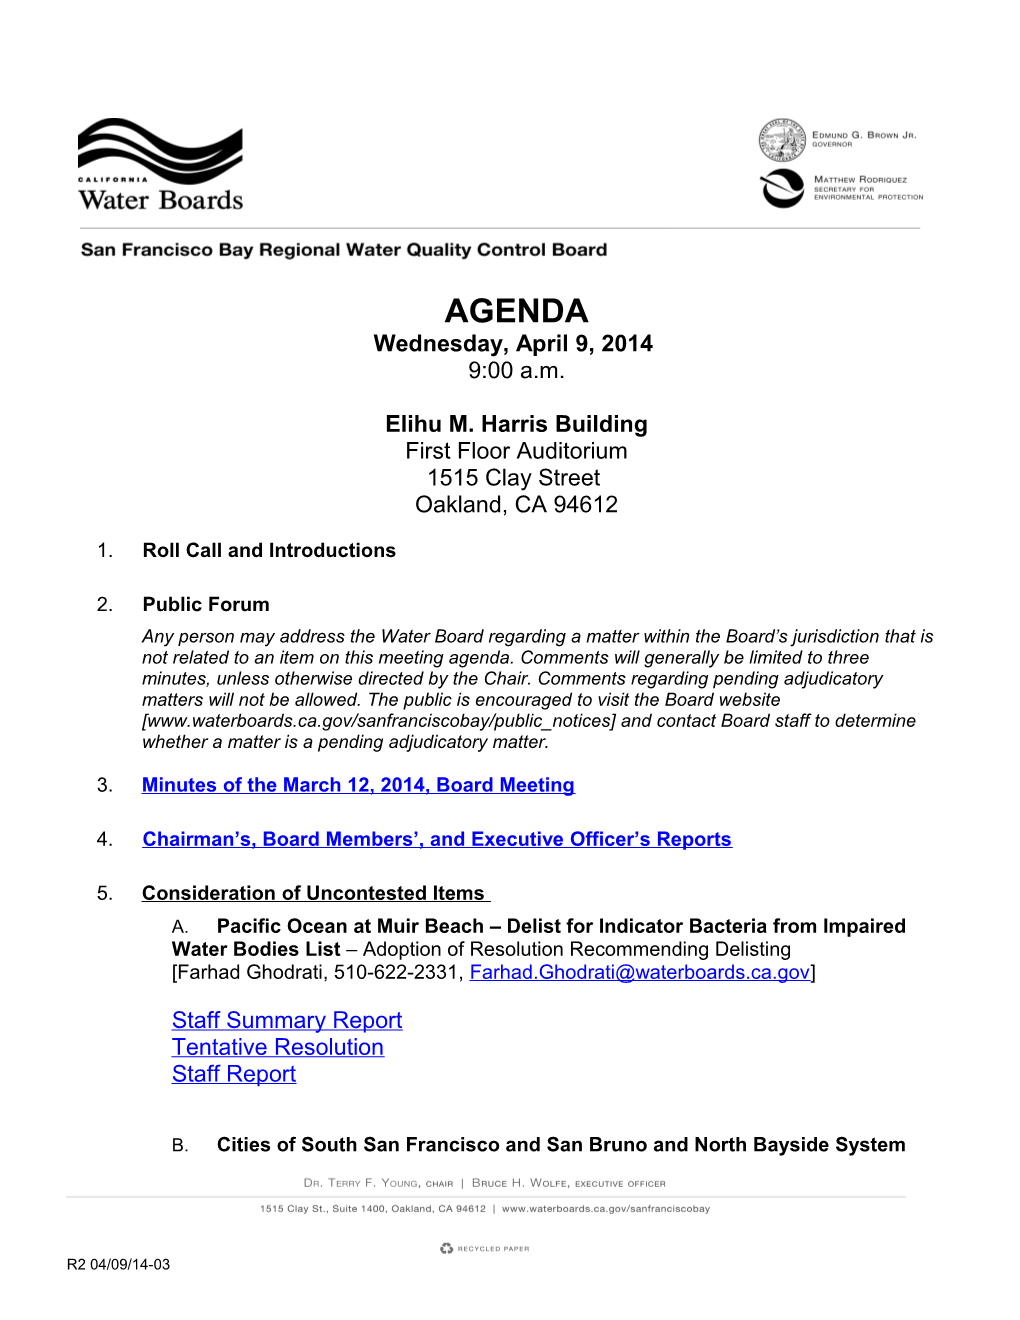 Water Board Meeting Agendapage 1